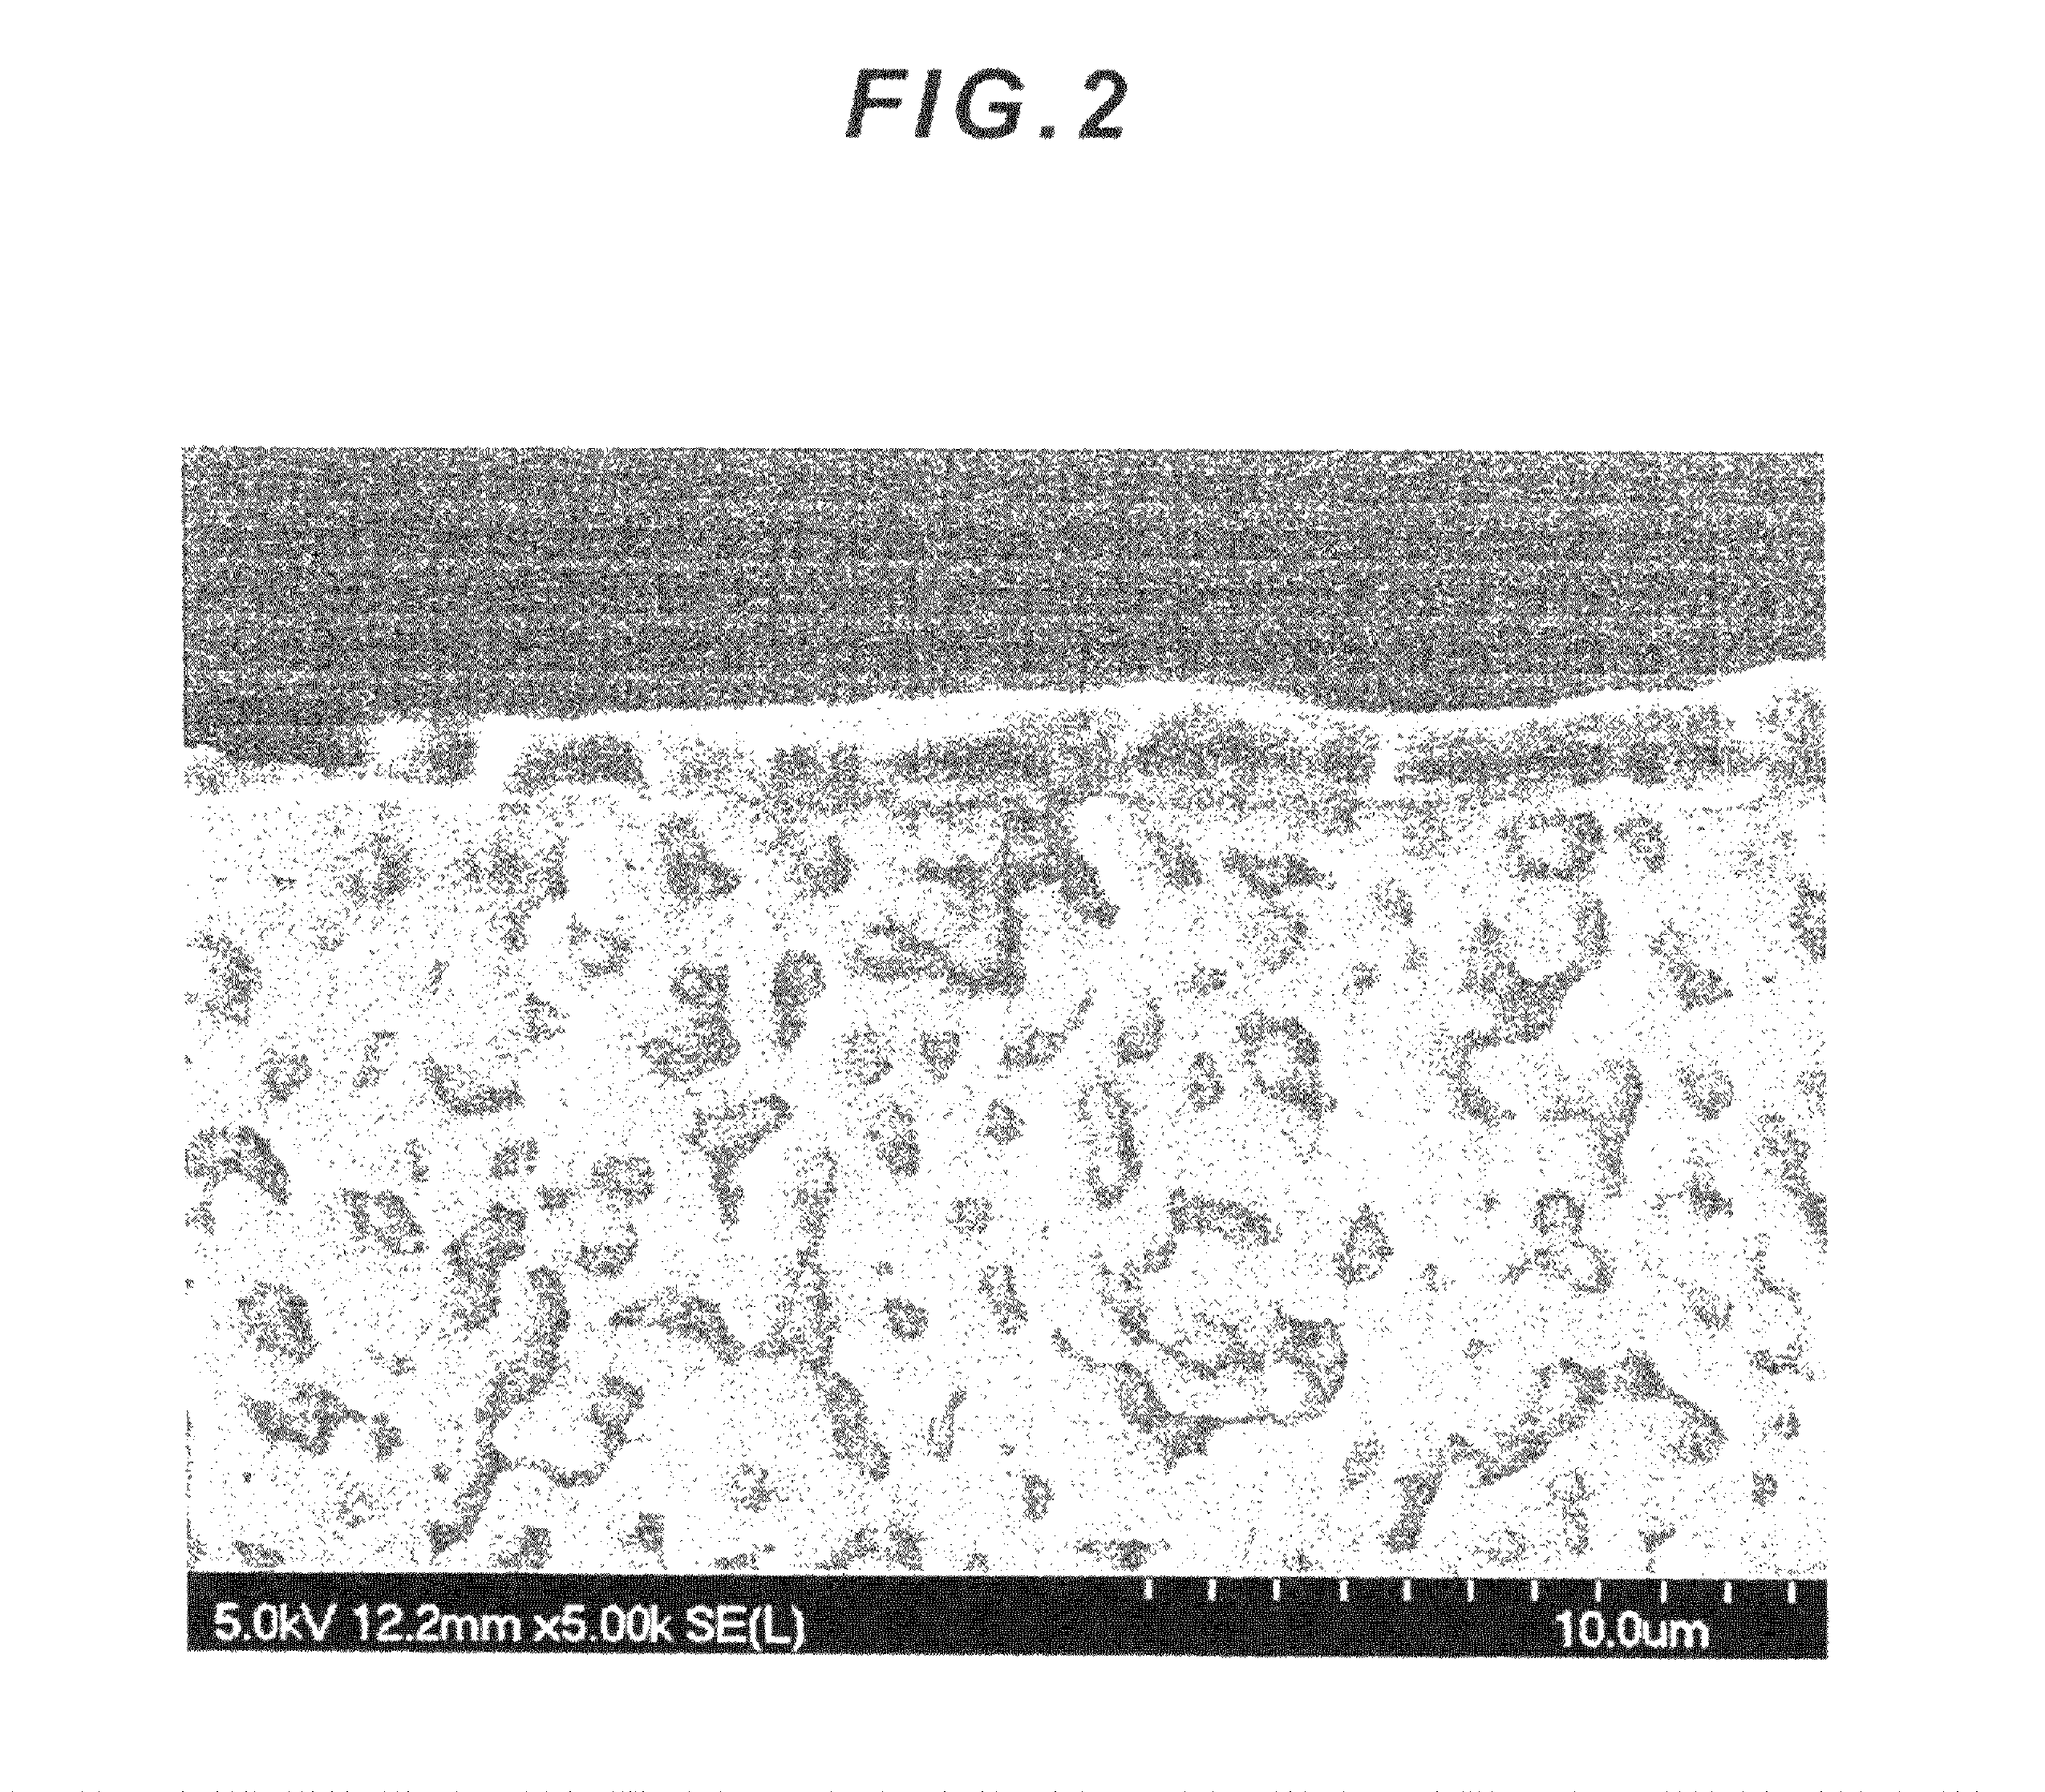 Stacked electronic part and method of manufacturing the same